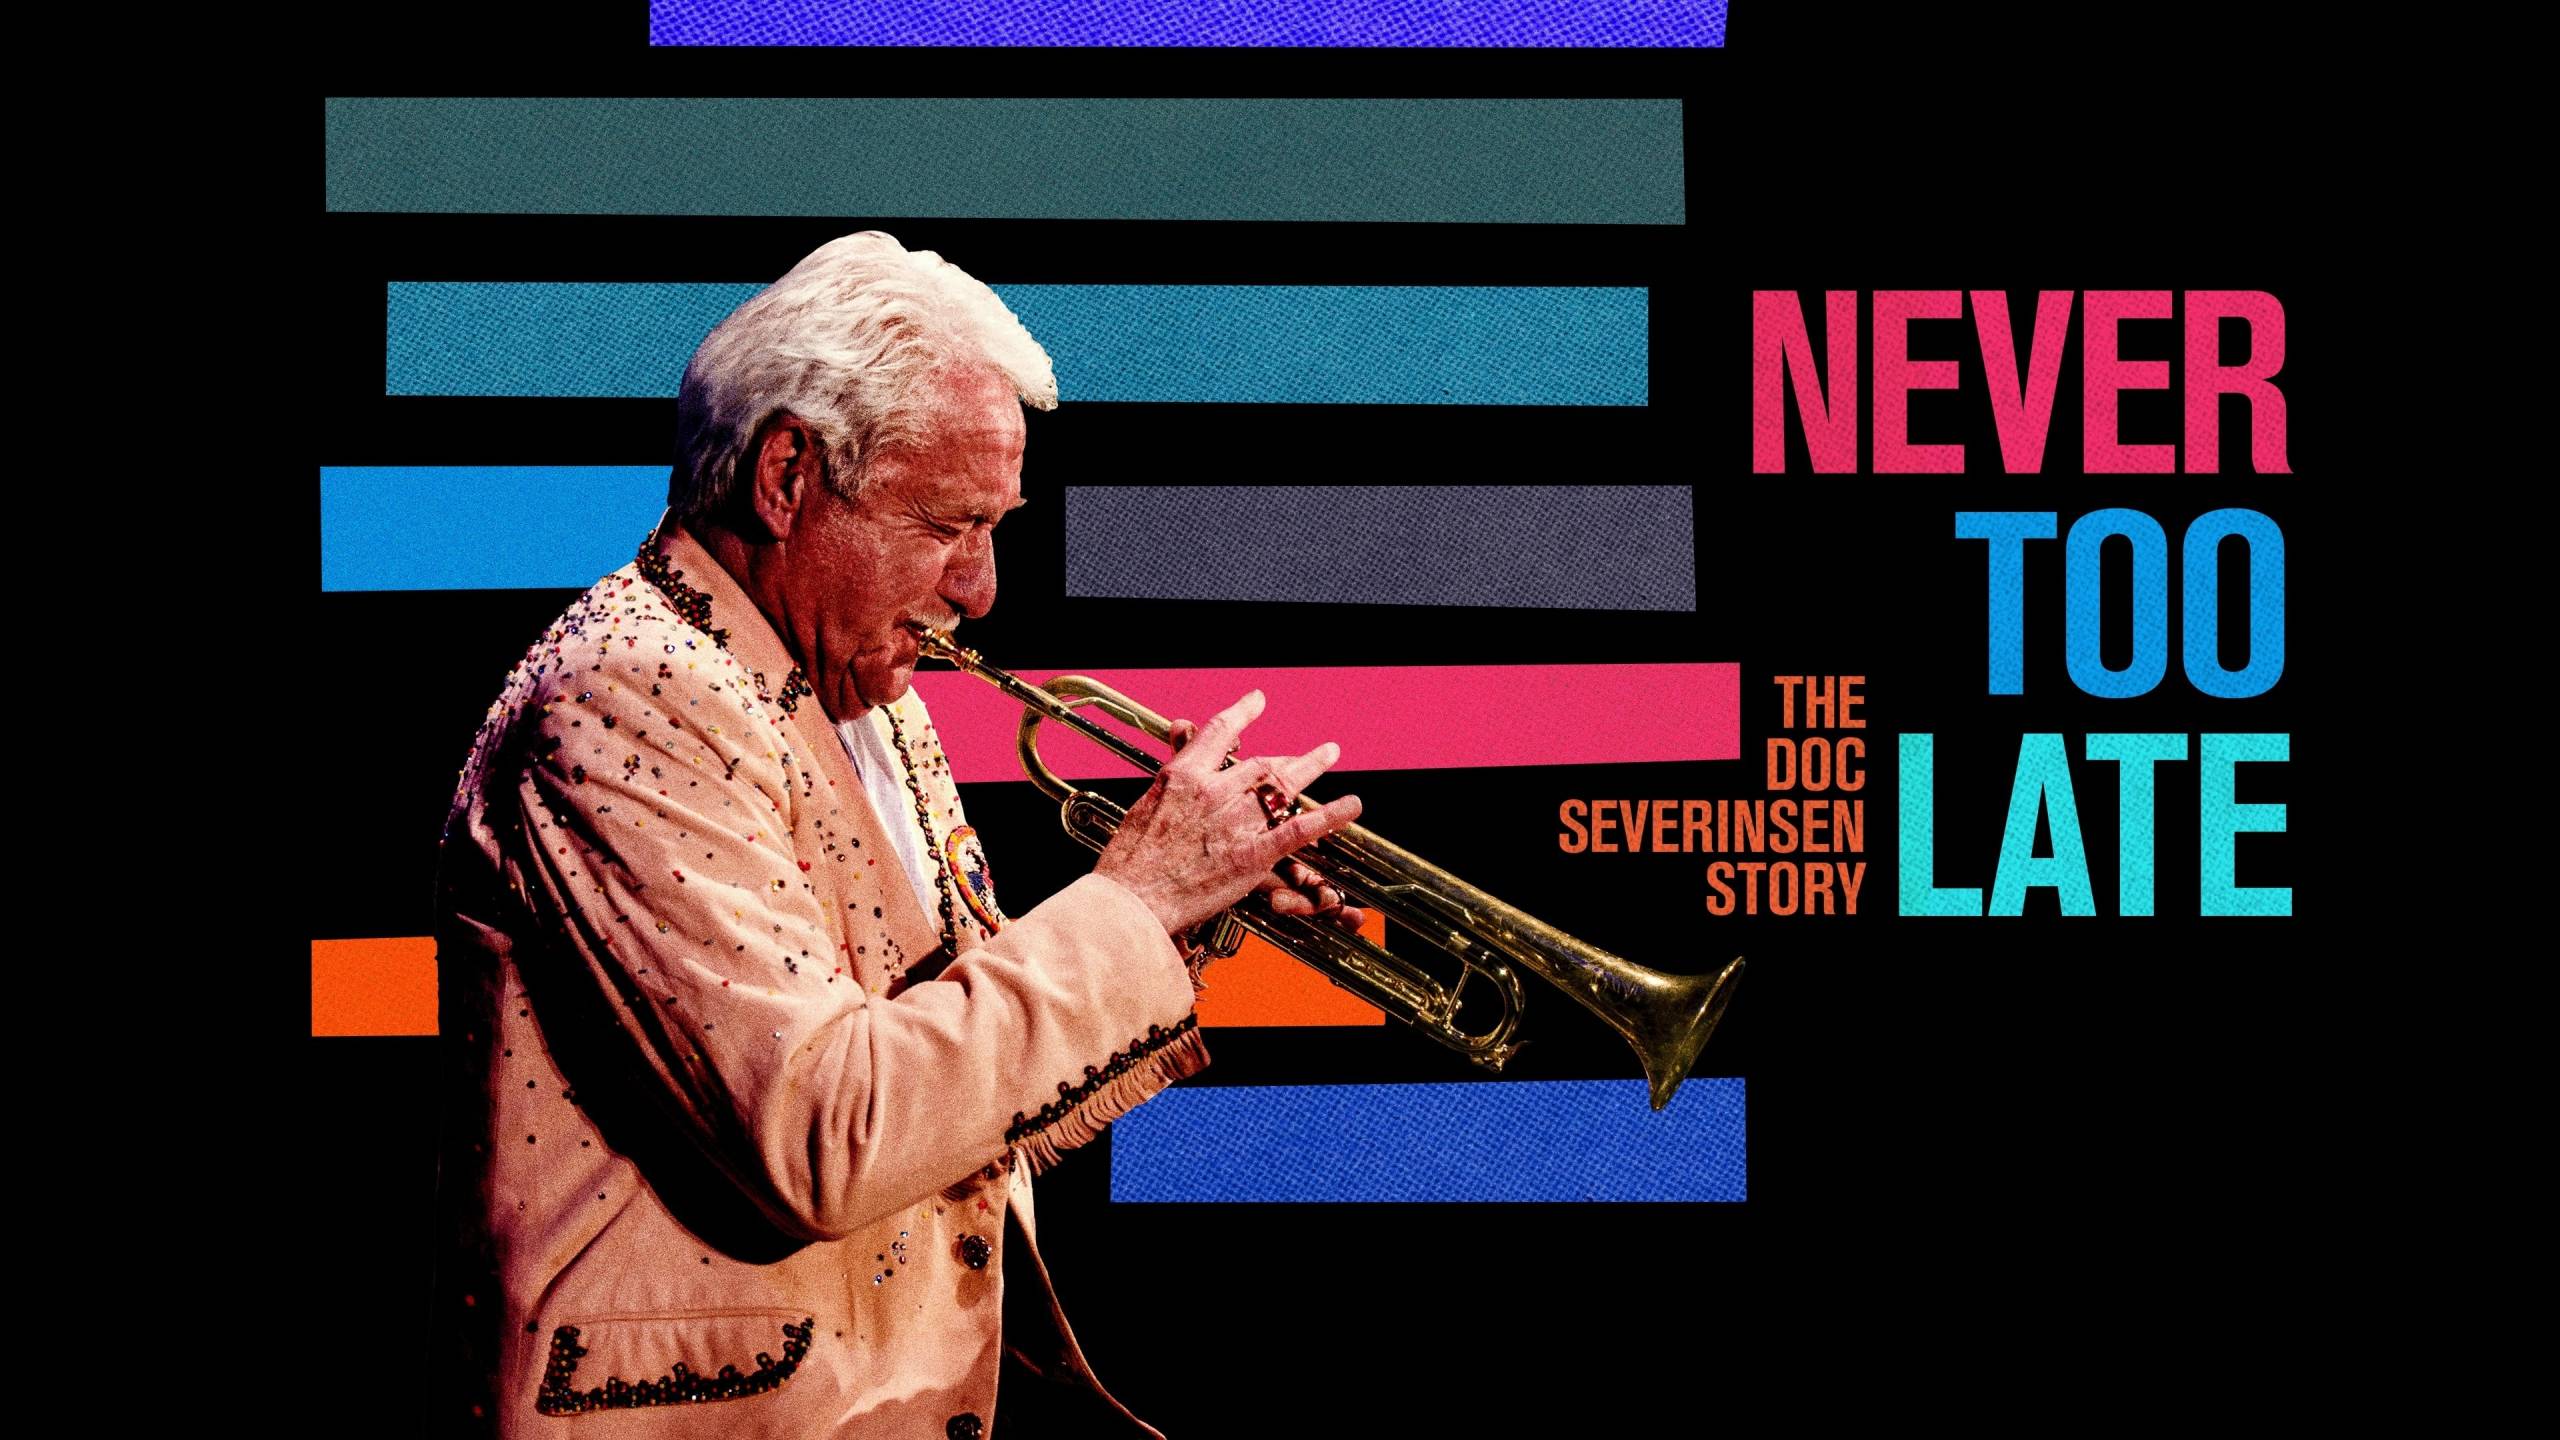 Cubierta de Never Too Late: The Doc Severinsen Story